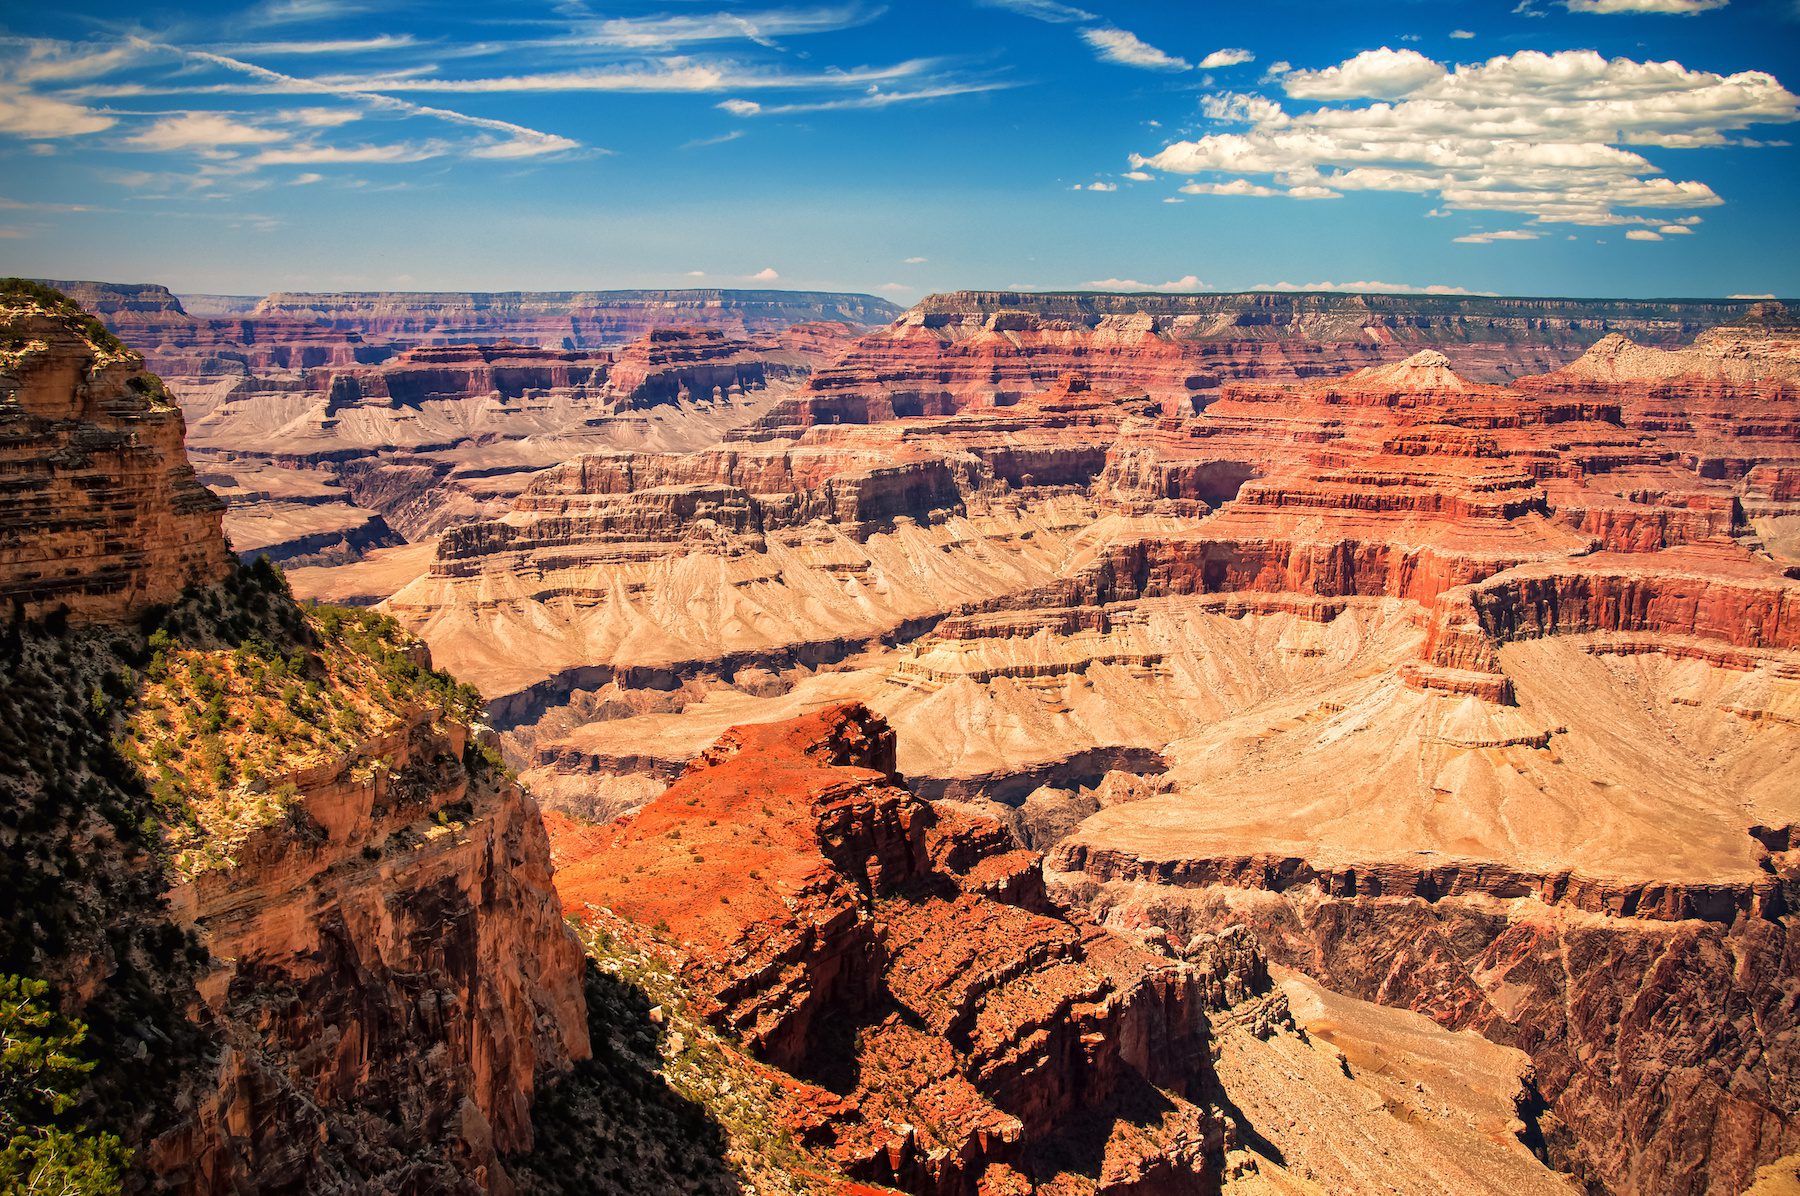 Deep peaks of valleys consisting of red rock constitute the Grand Canyon National Park, Arizona